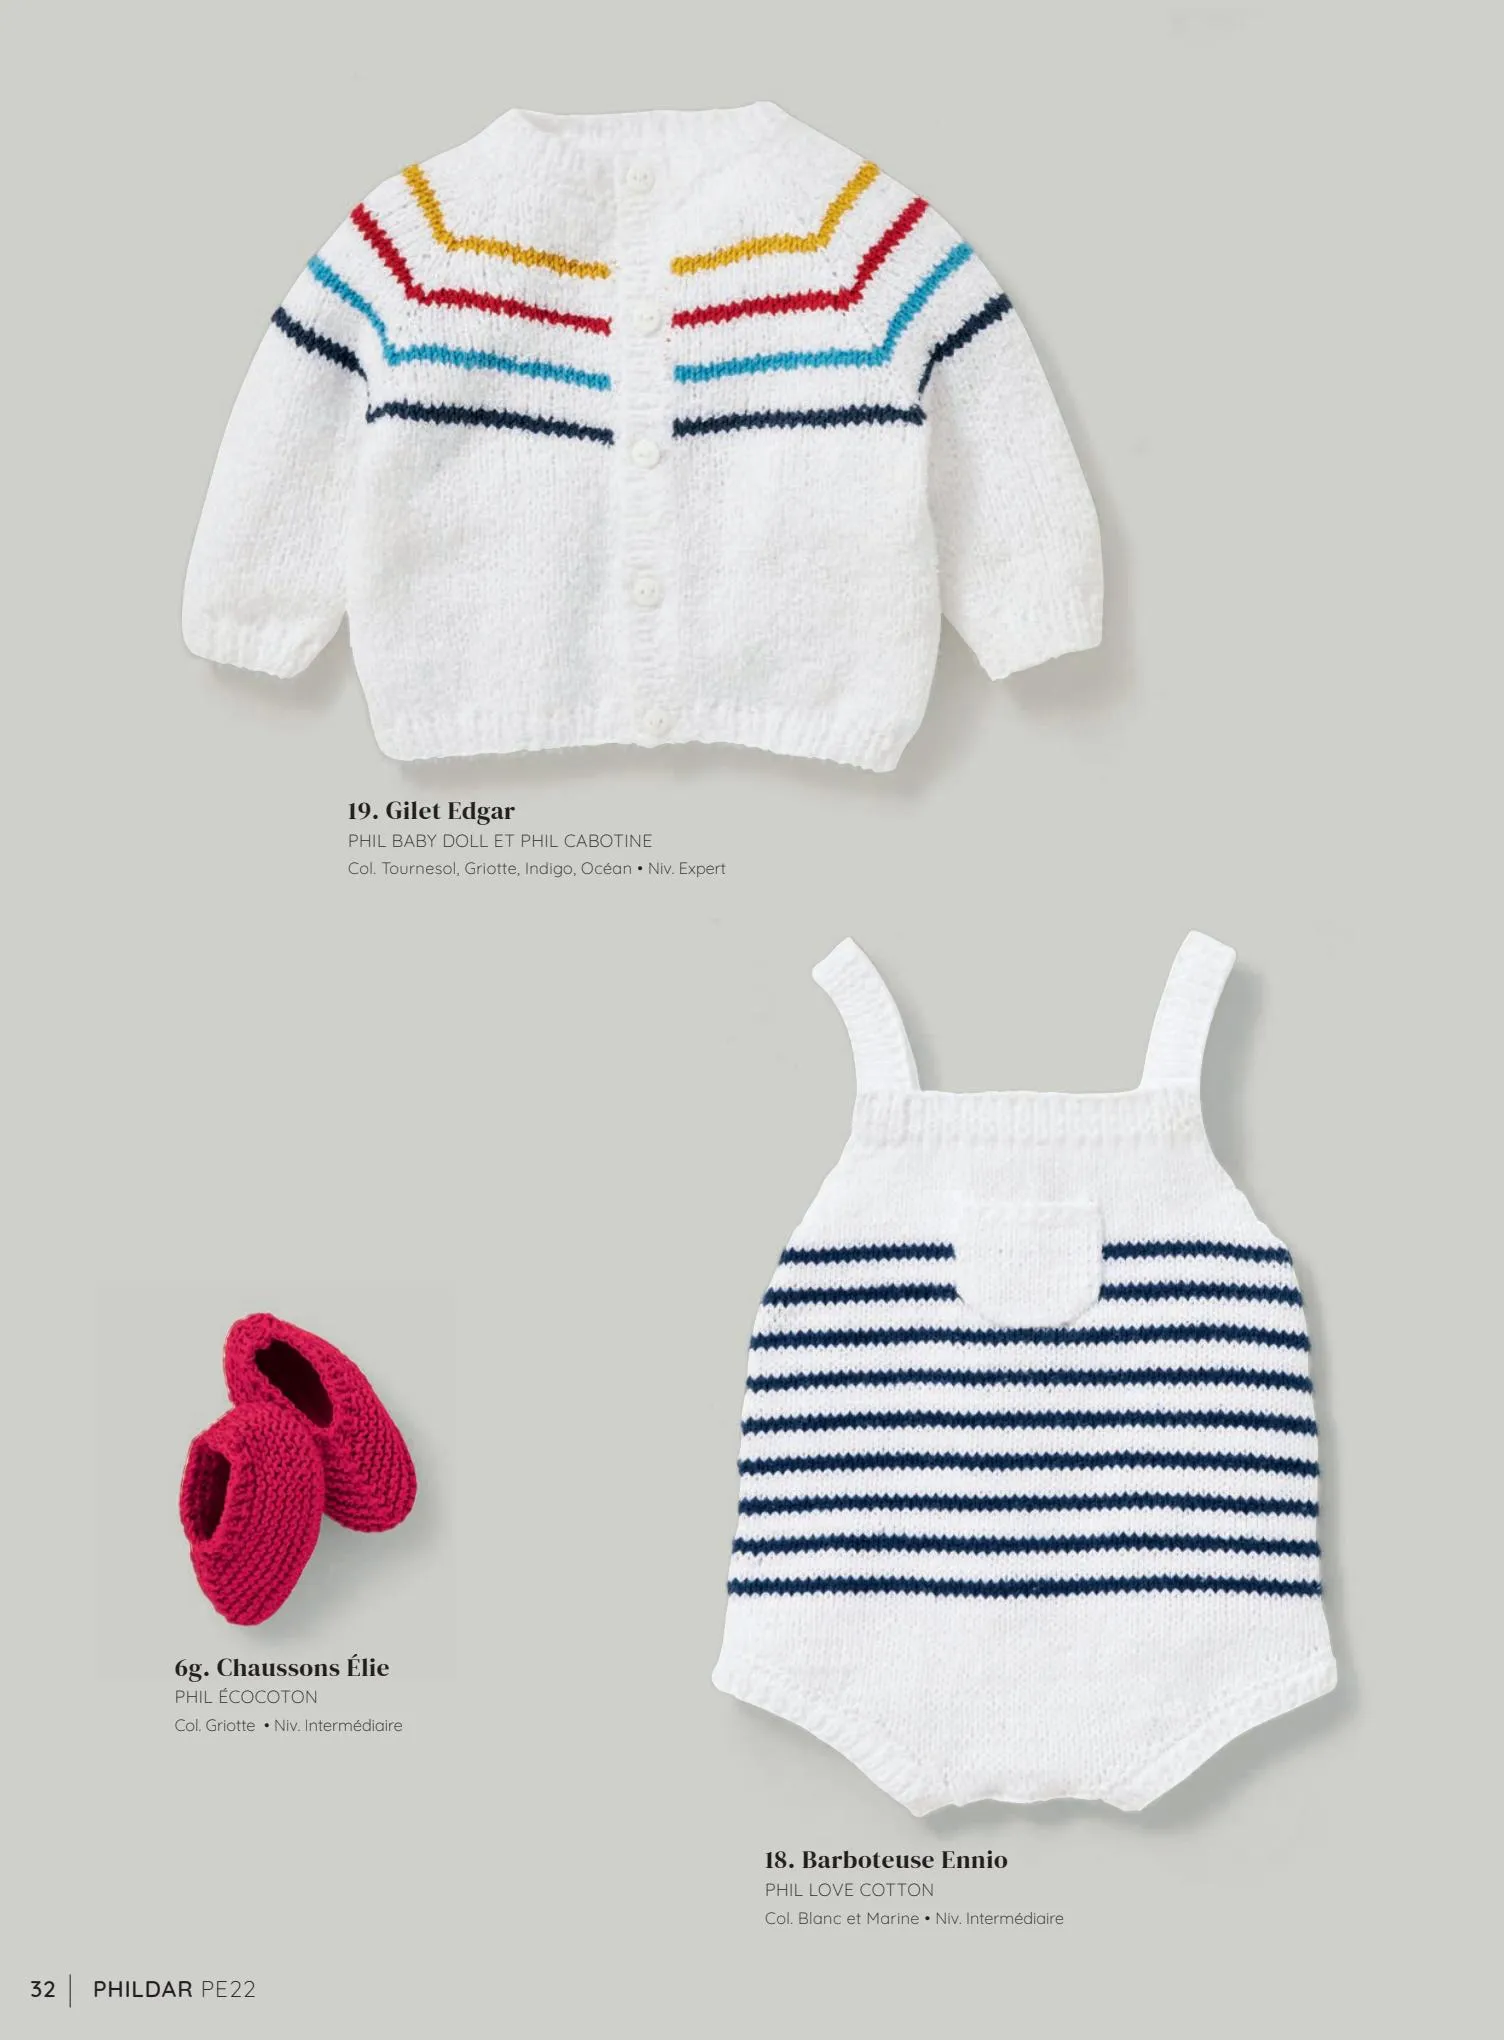 Catalogue Catalogue n°212 Layette, page 00030